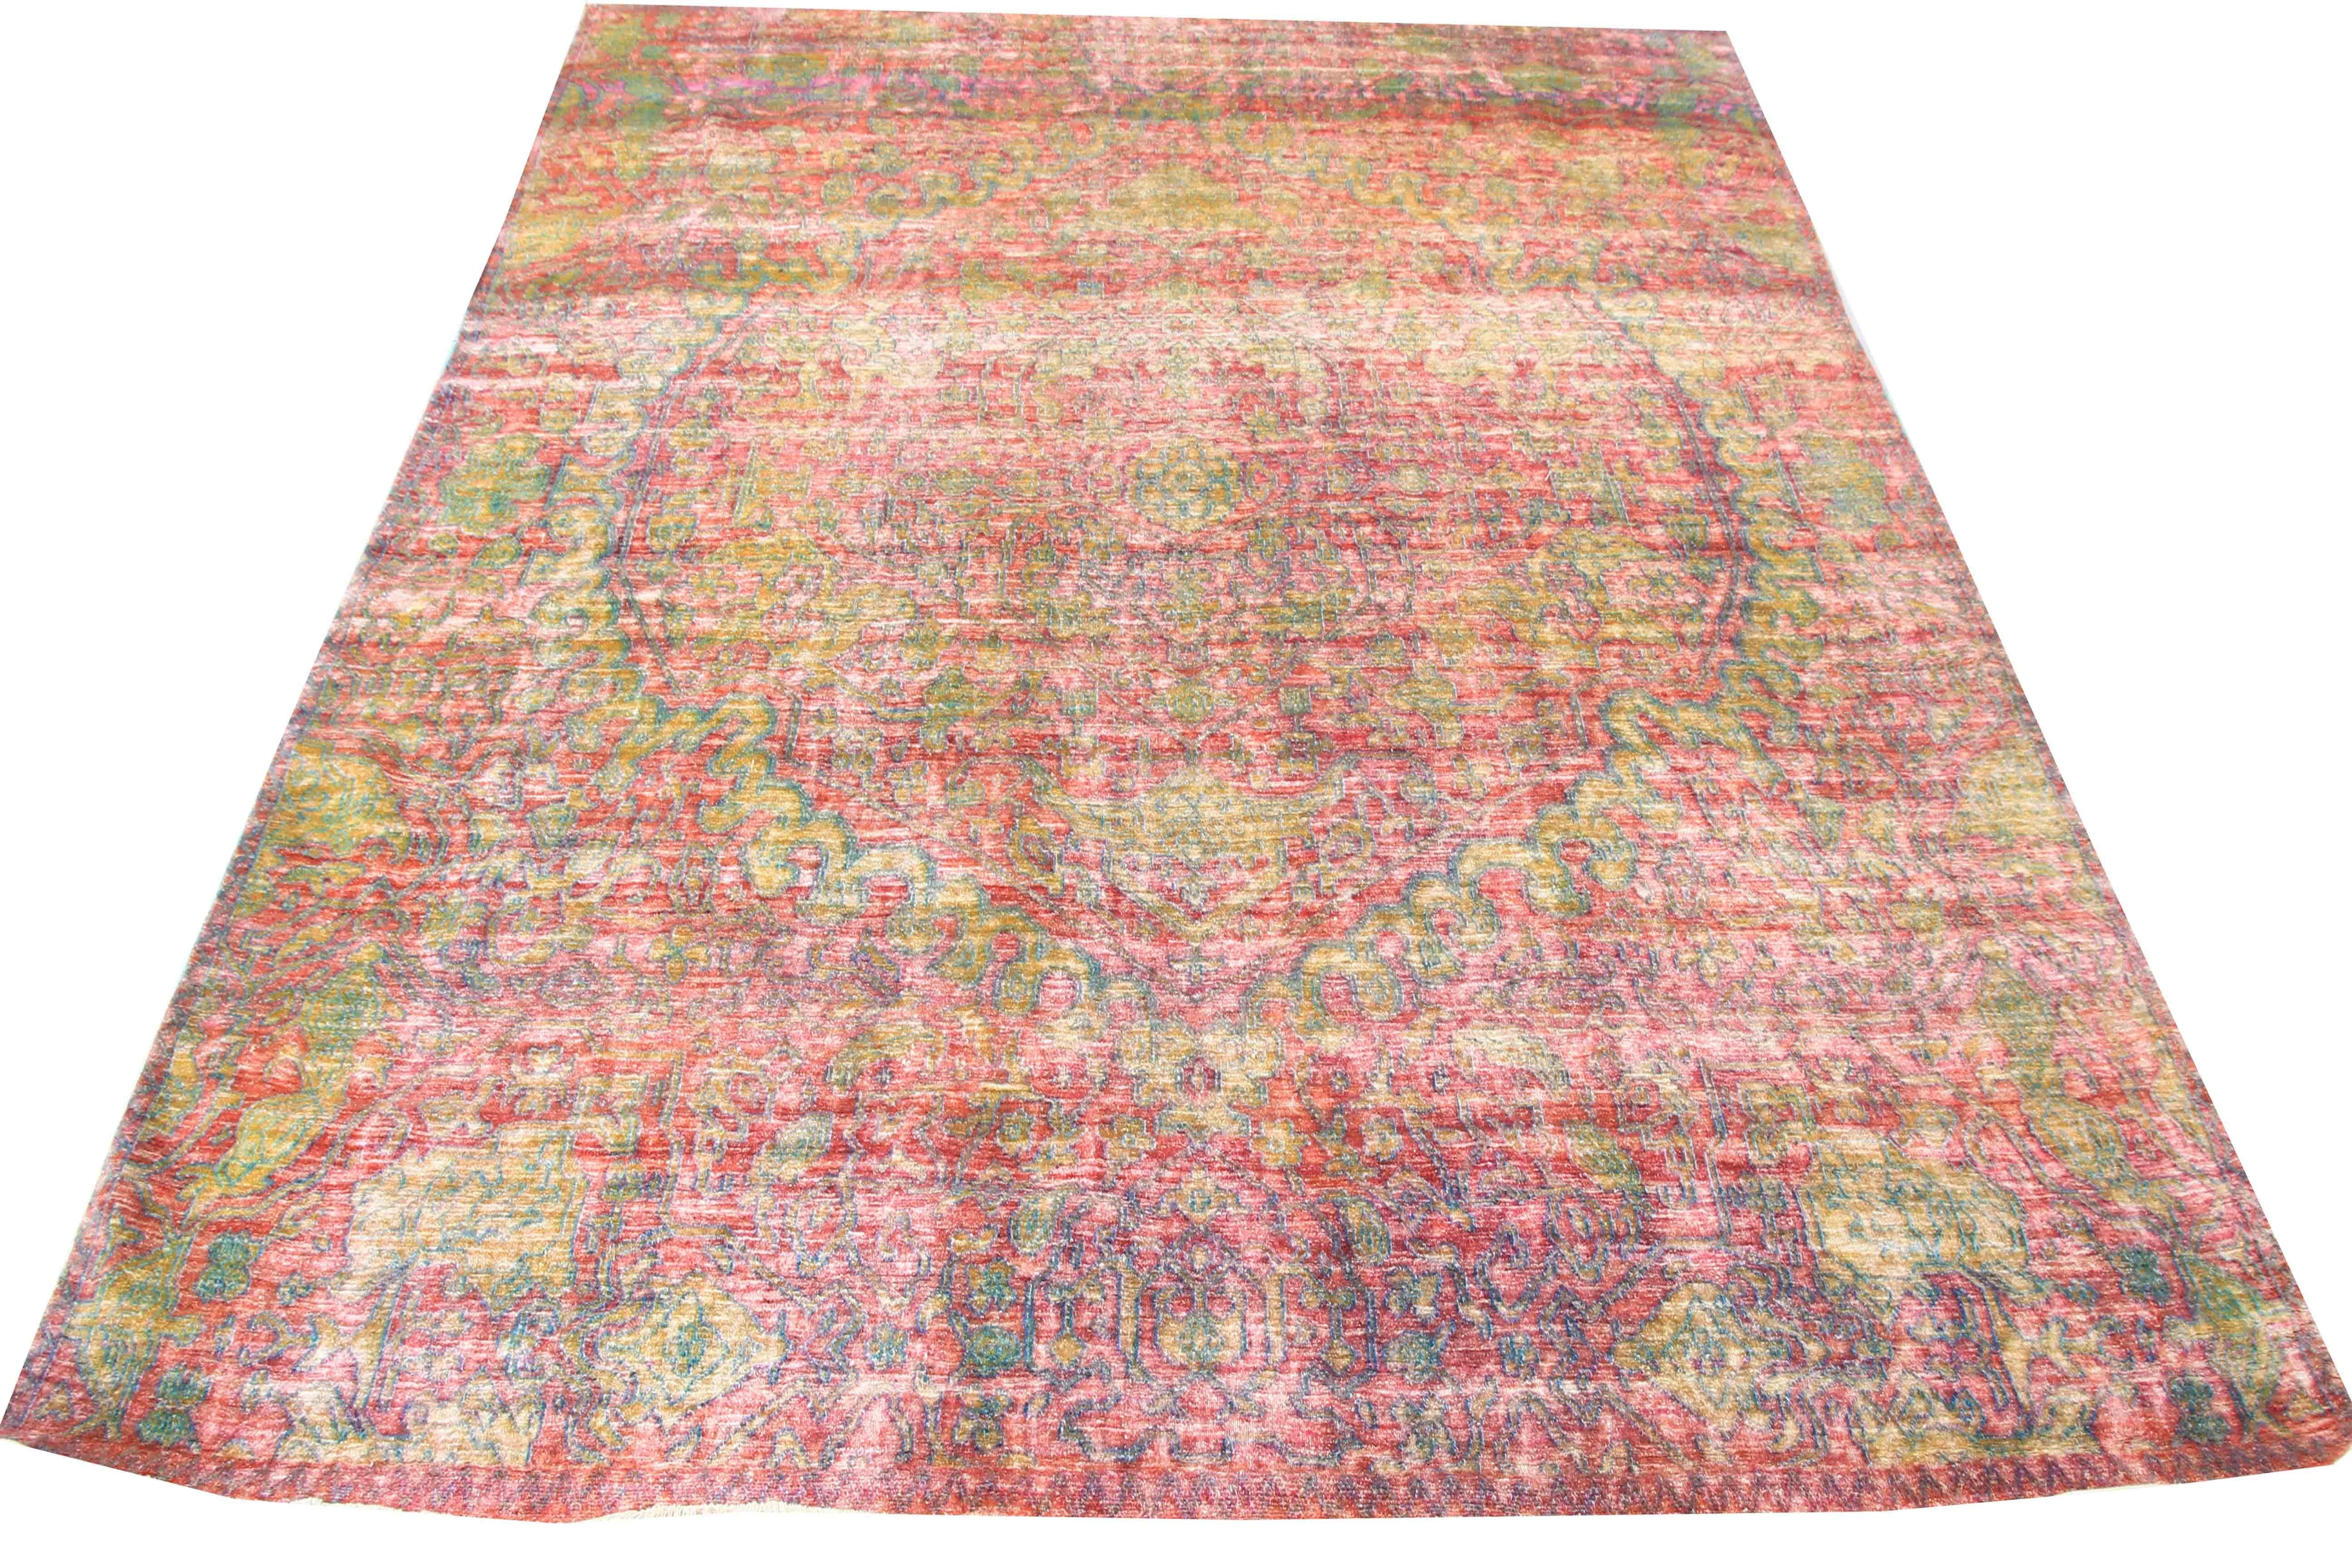 Hand-Knotted Linen, Wool, and Silk Rug - 8'8